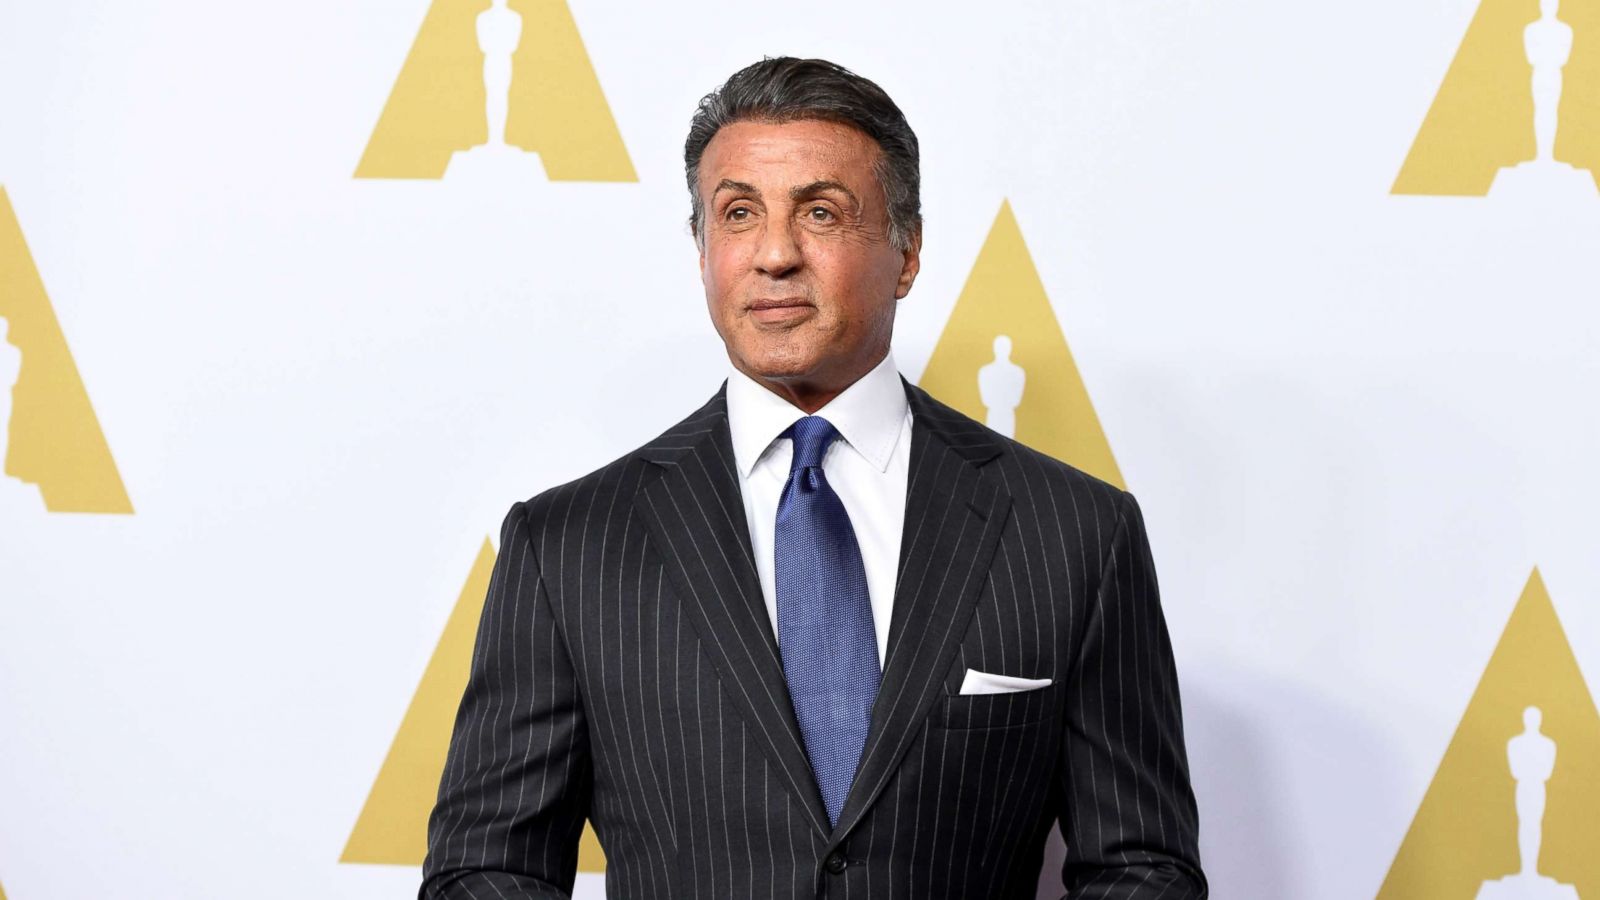 Sylvester Stallone now fights off sex assault claim - Washington Times